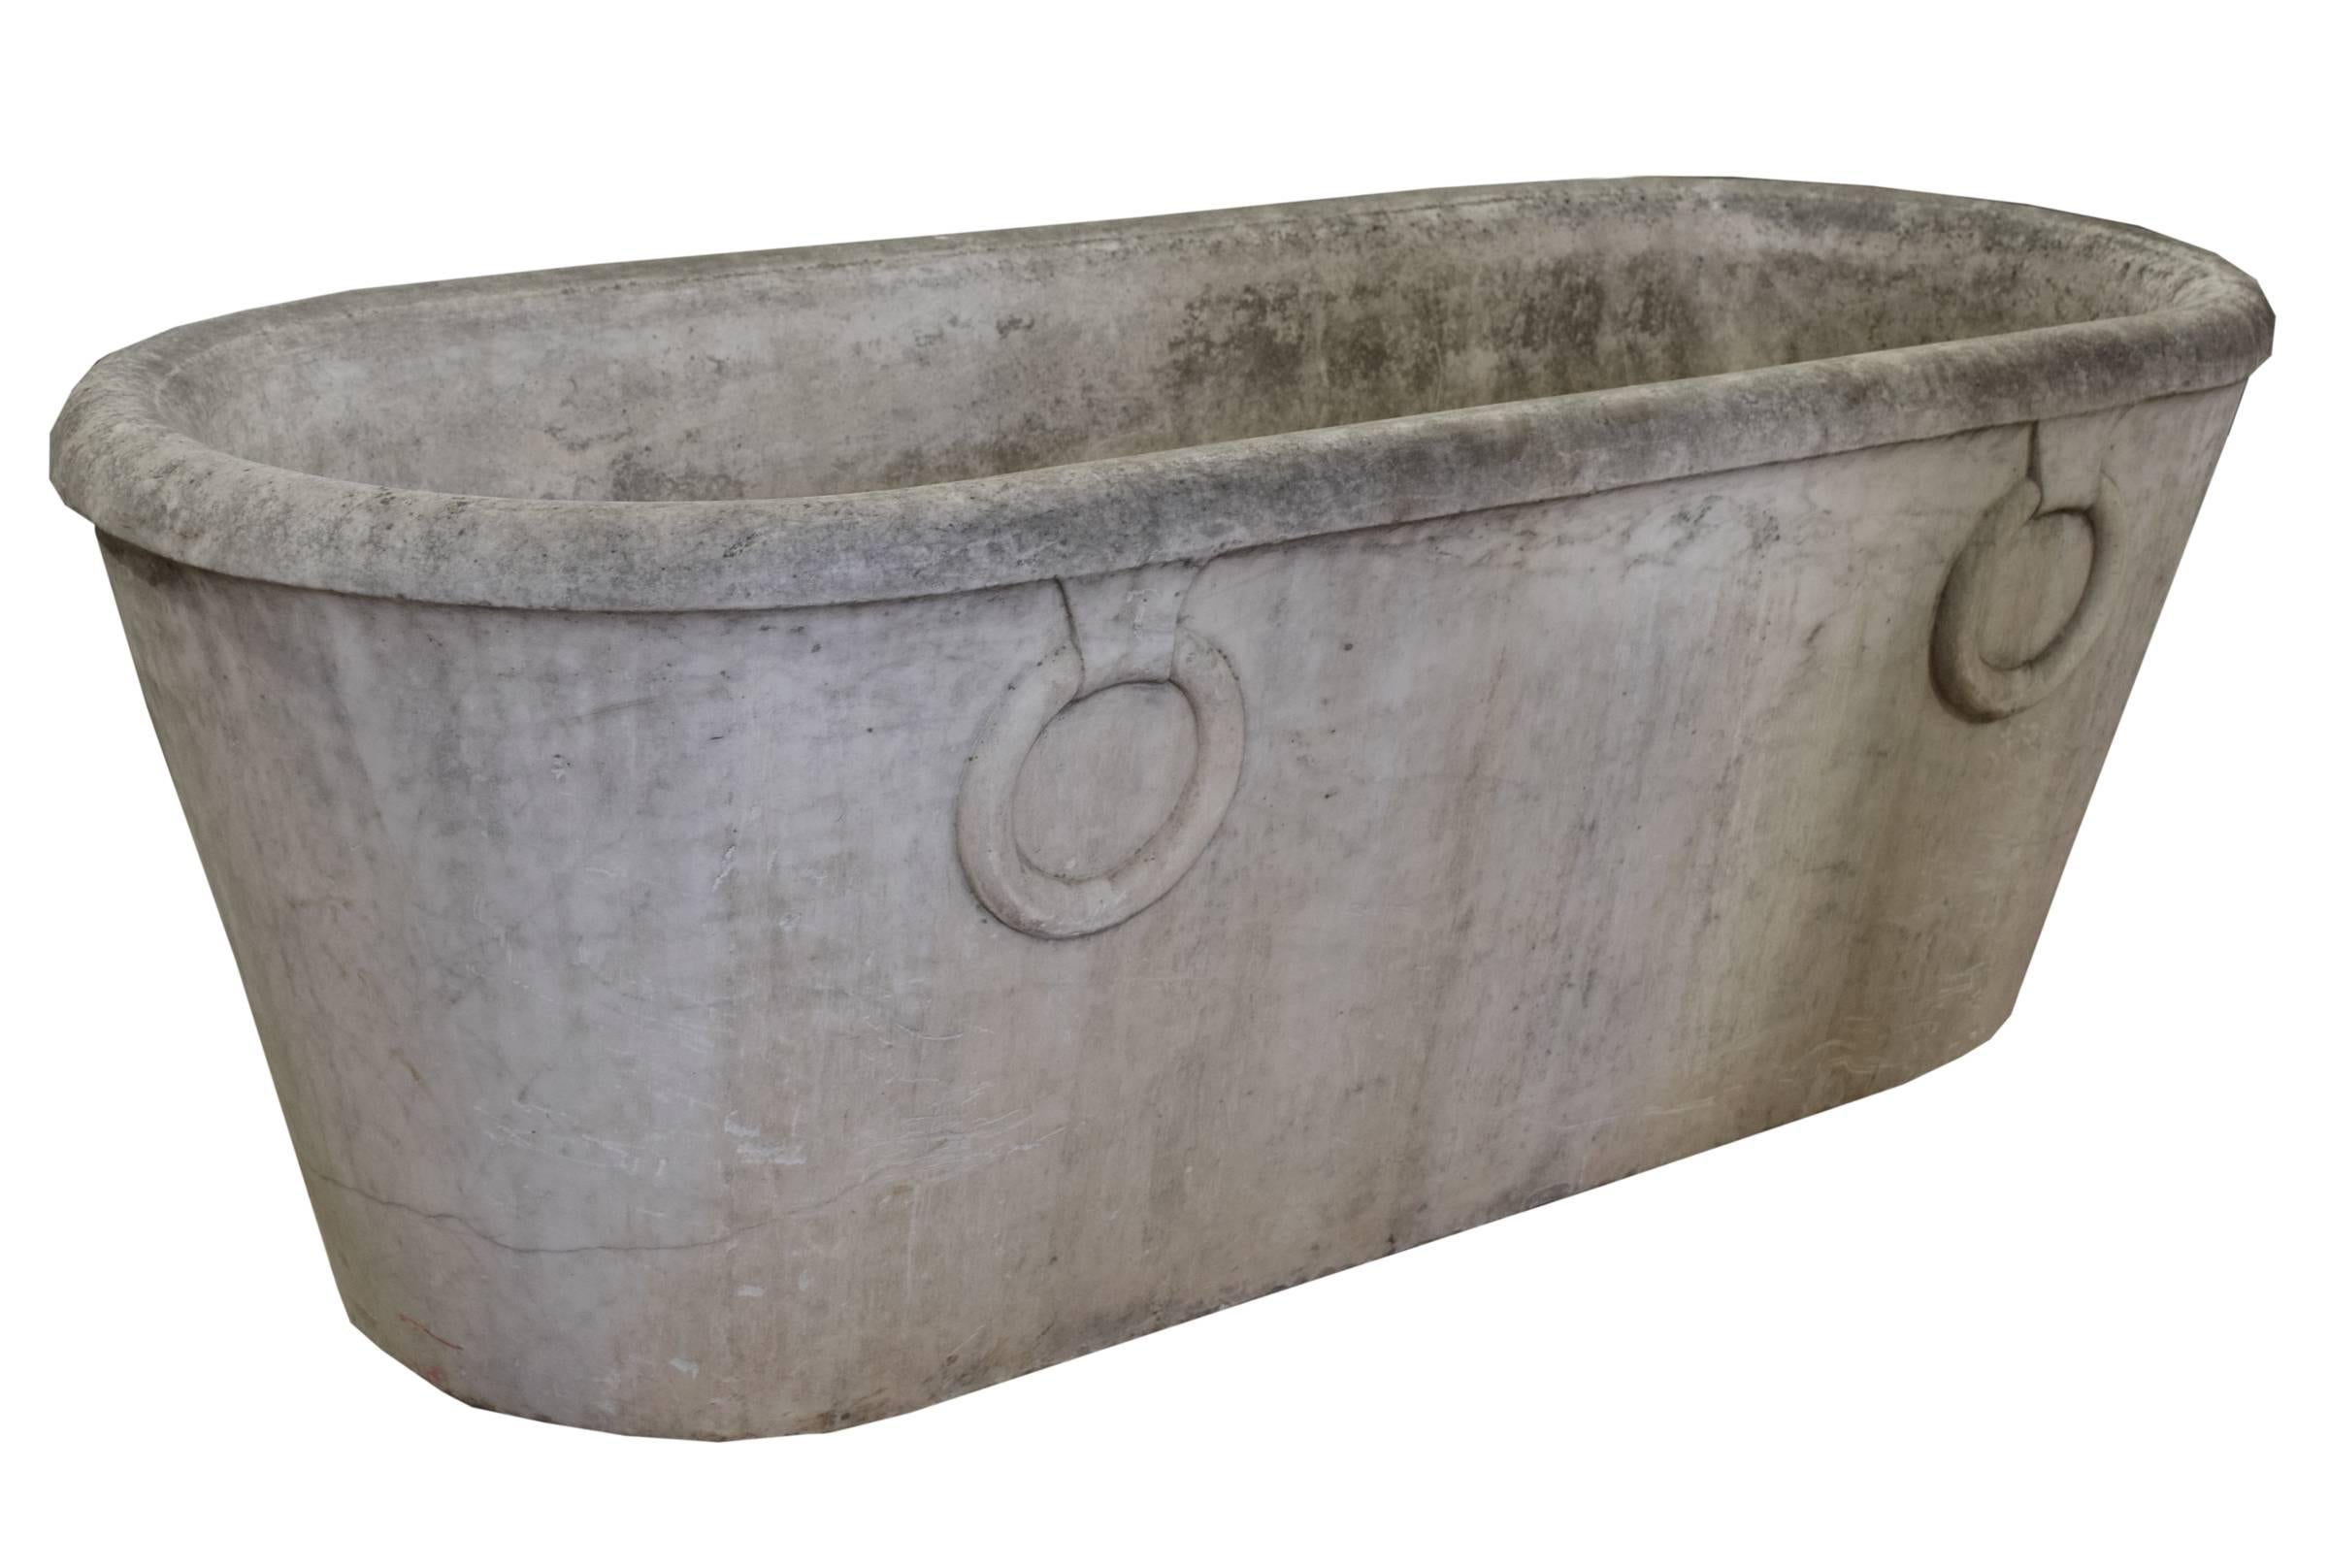 An incredible 18th century Italian marble bathtub, carved in ancient Roman style.